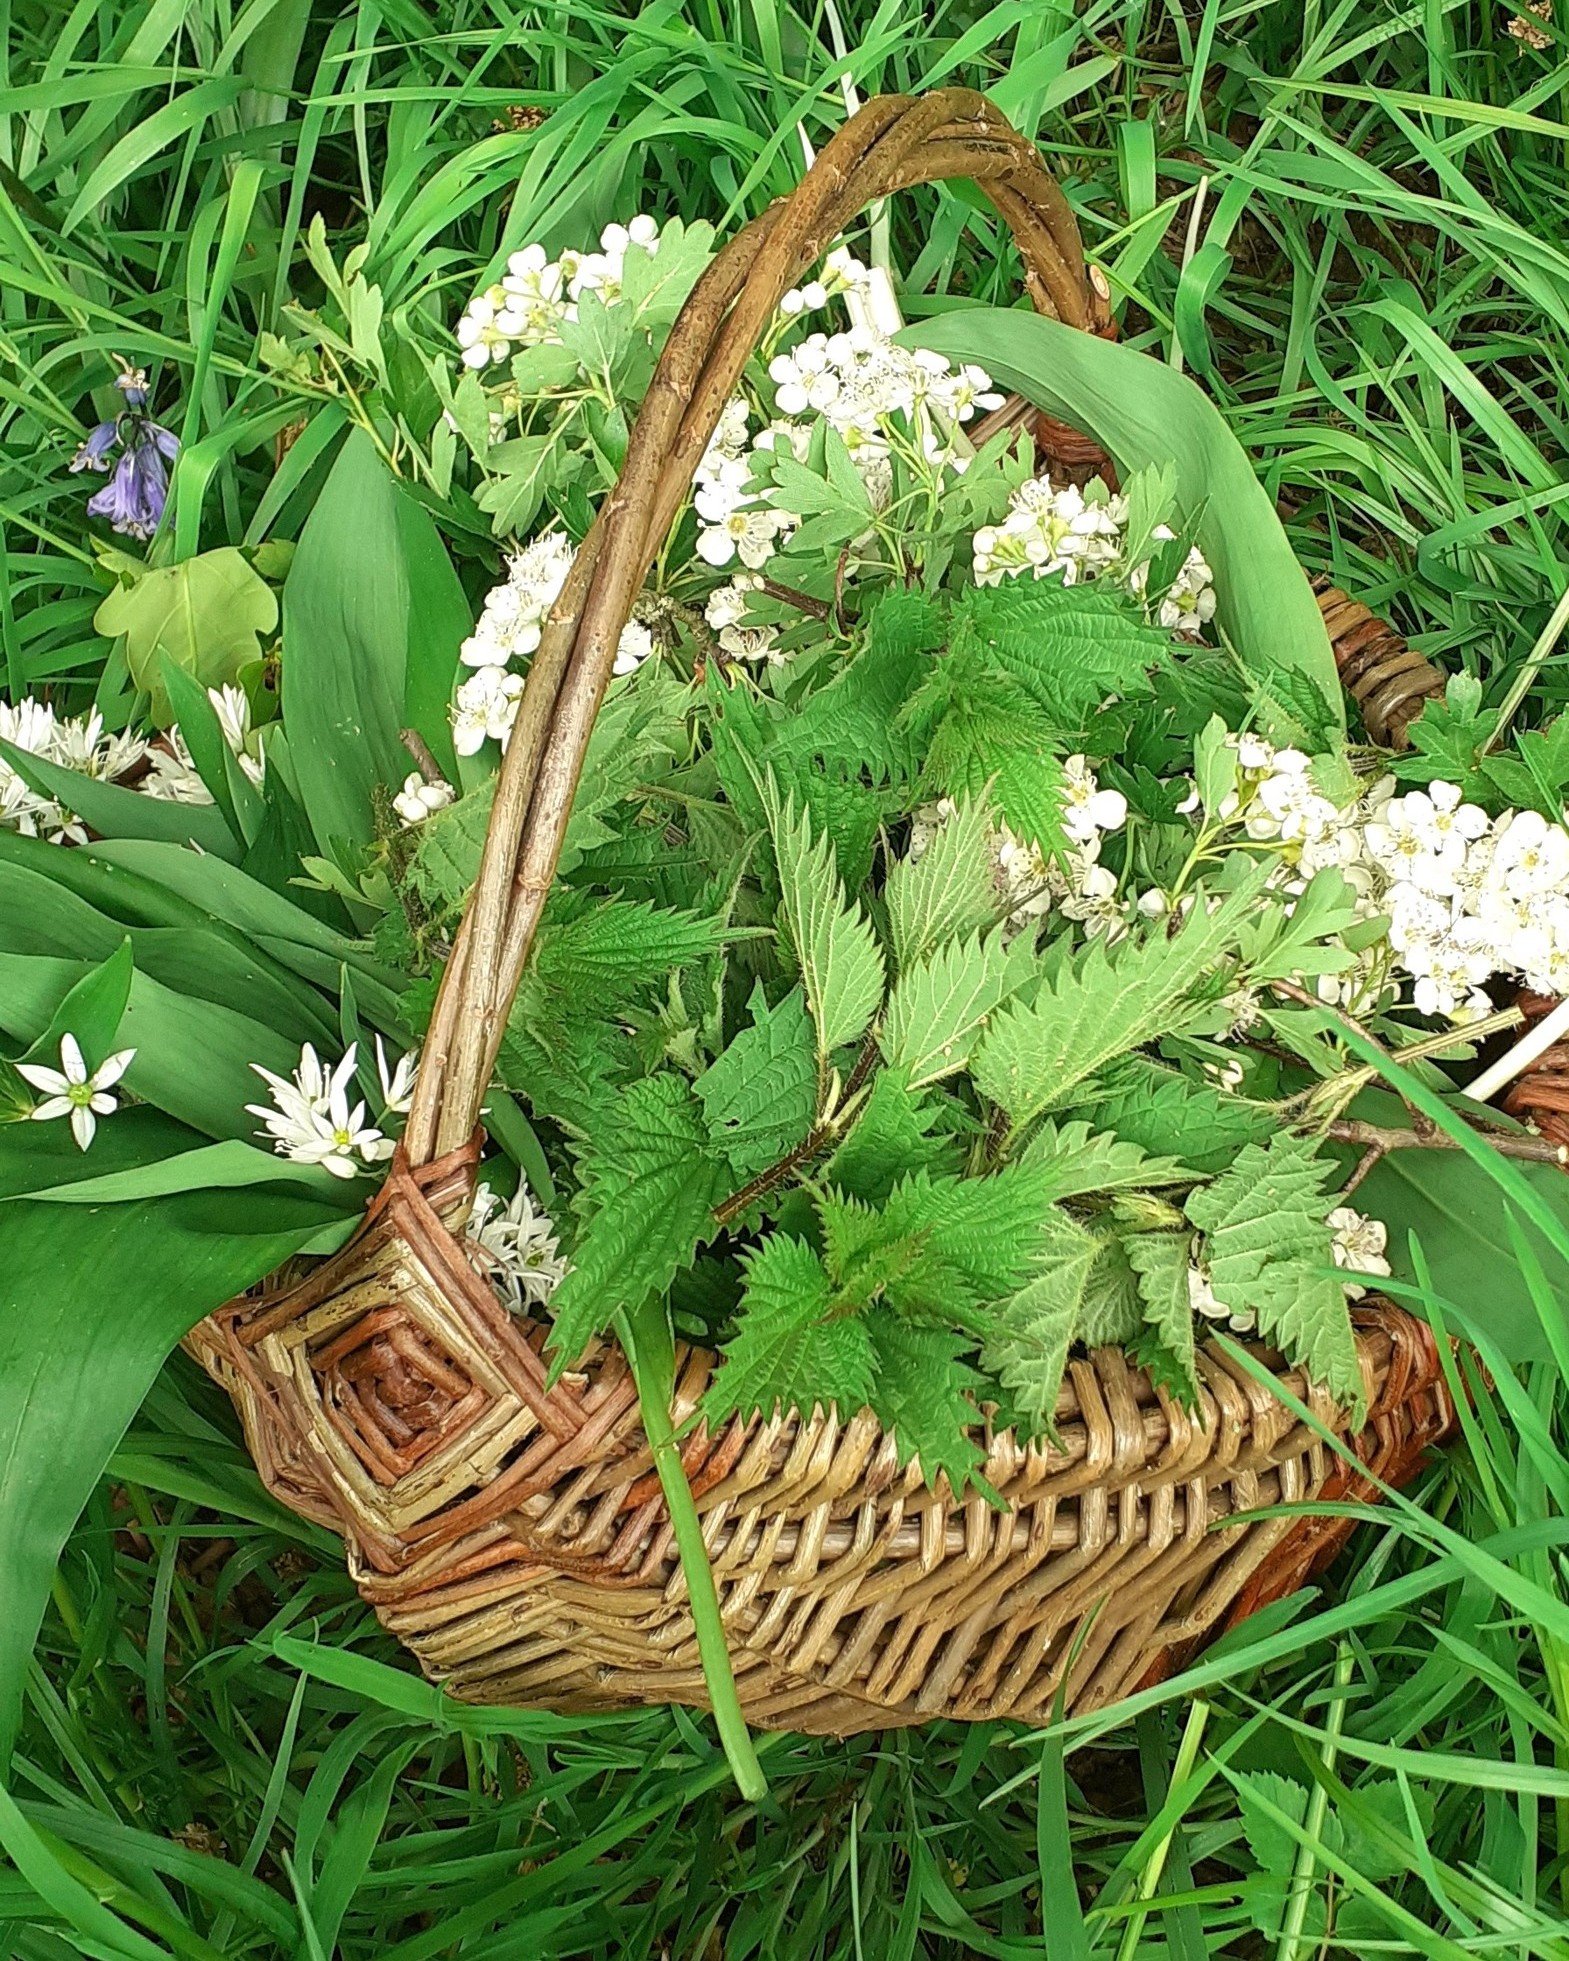 Framed berry basket weaving
Friday 31st May

One of the earliest styles of basket ever discovered.  Great for foraging.  First, we form two rings that are joined together with a god's eye.  The rest of the framework is added and then you just keep on